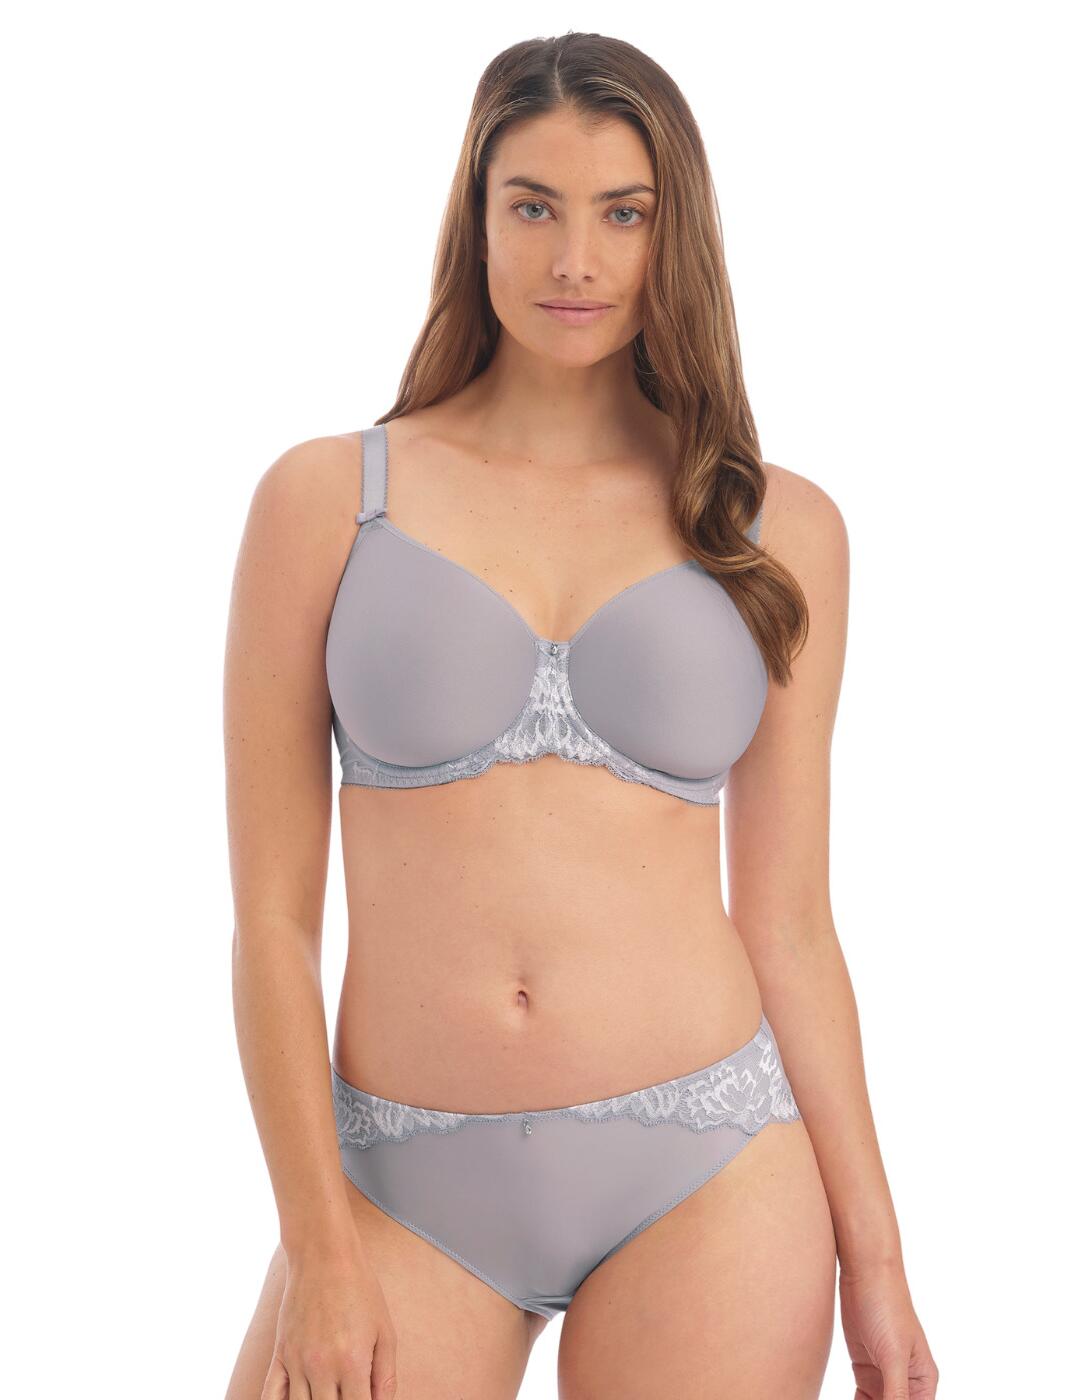 Fantasie Aubree Moulded Spacer Bra 6931 Underwired Full Cup